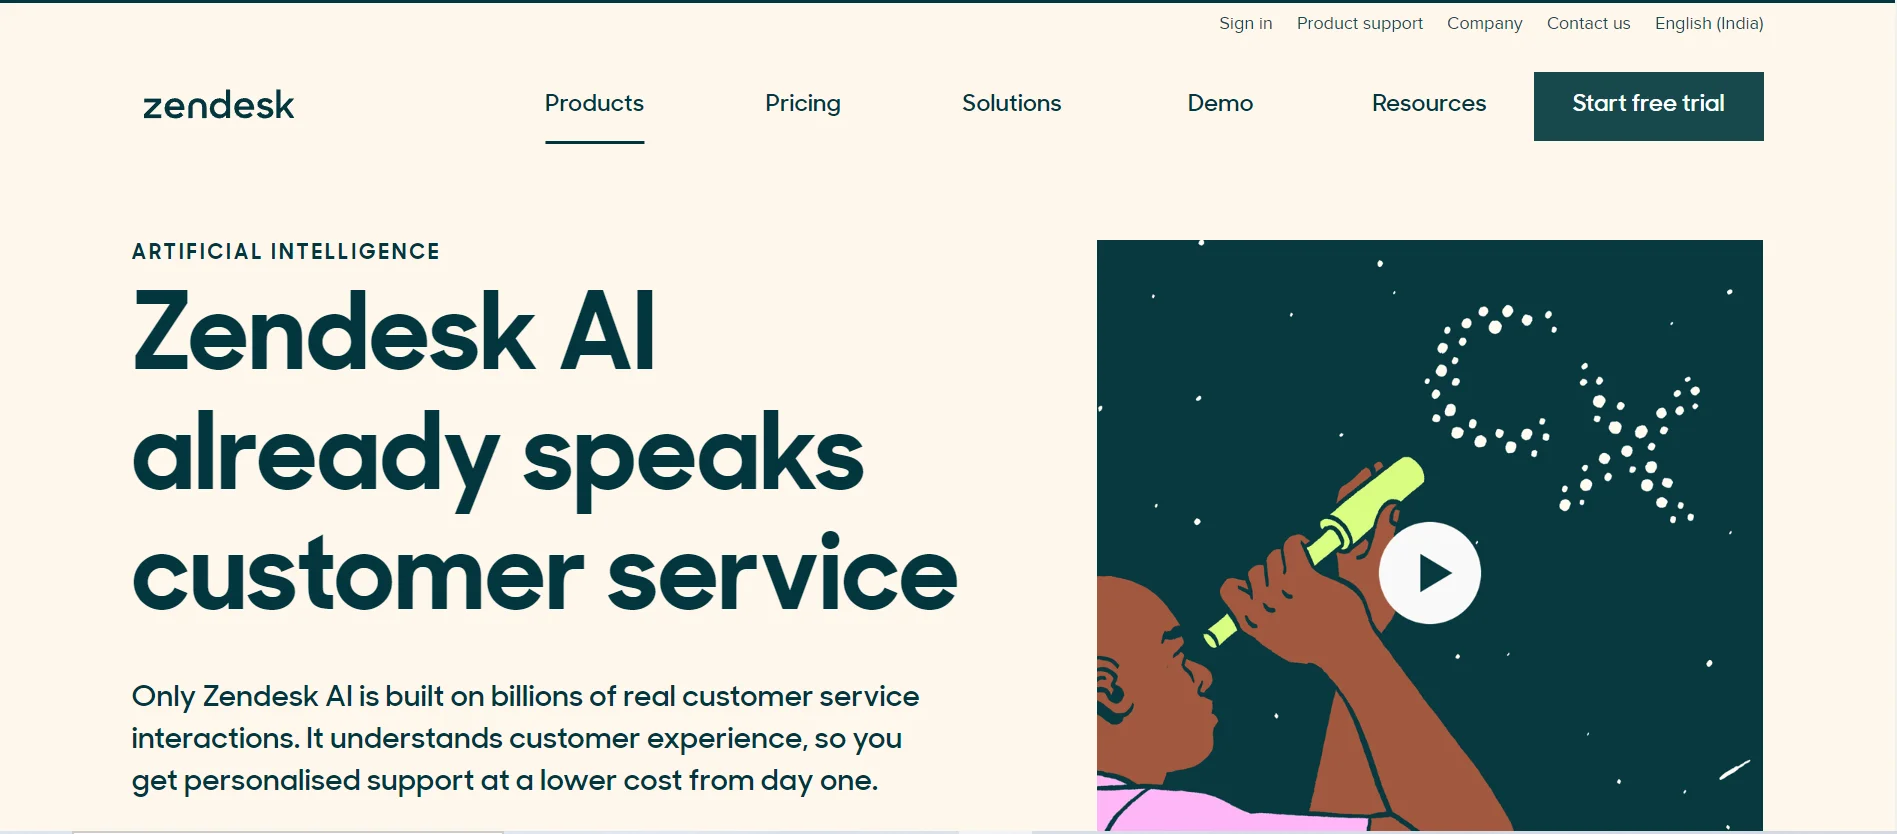 zendesk answer bot home page